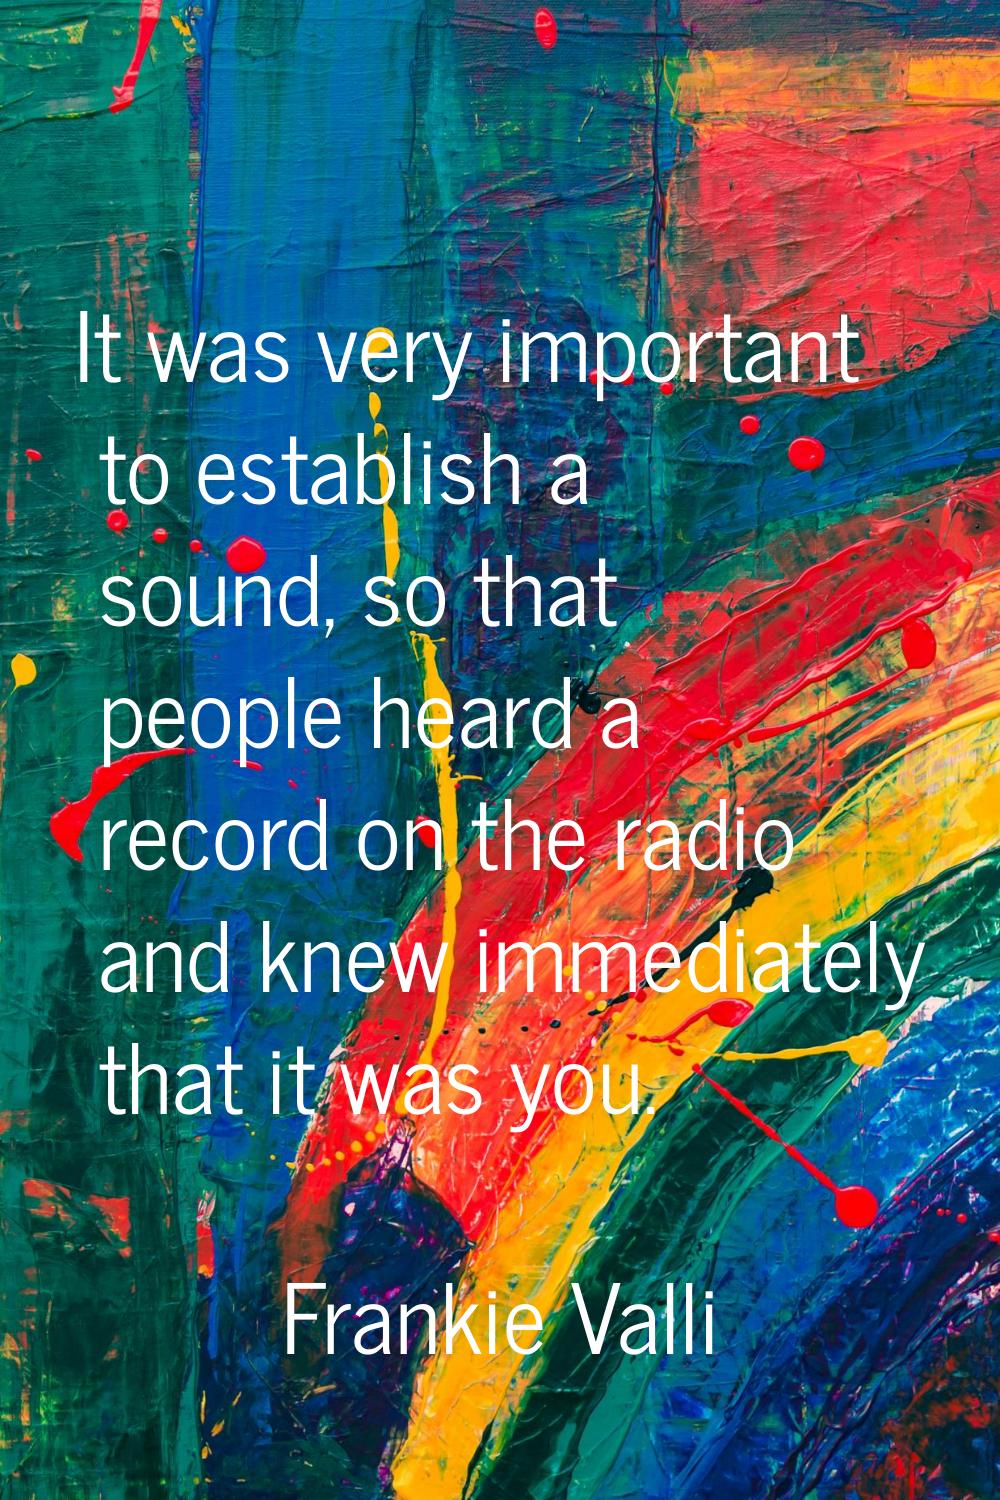 It was very important to establish a sound, so that people heard a record on the radio and knew imm